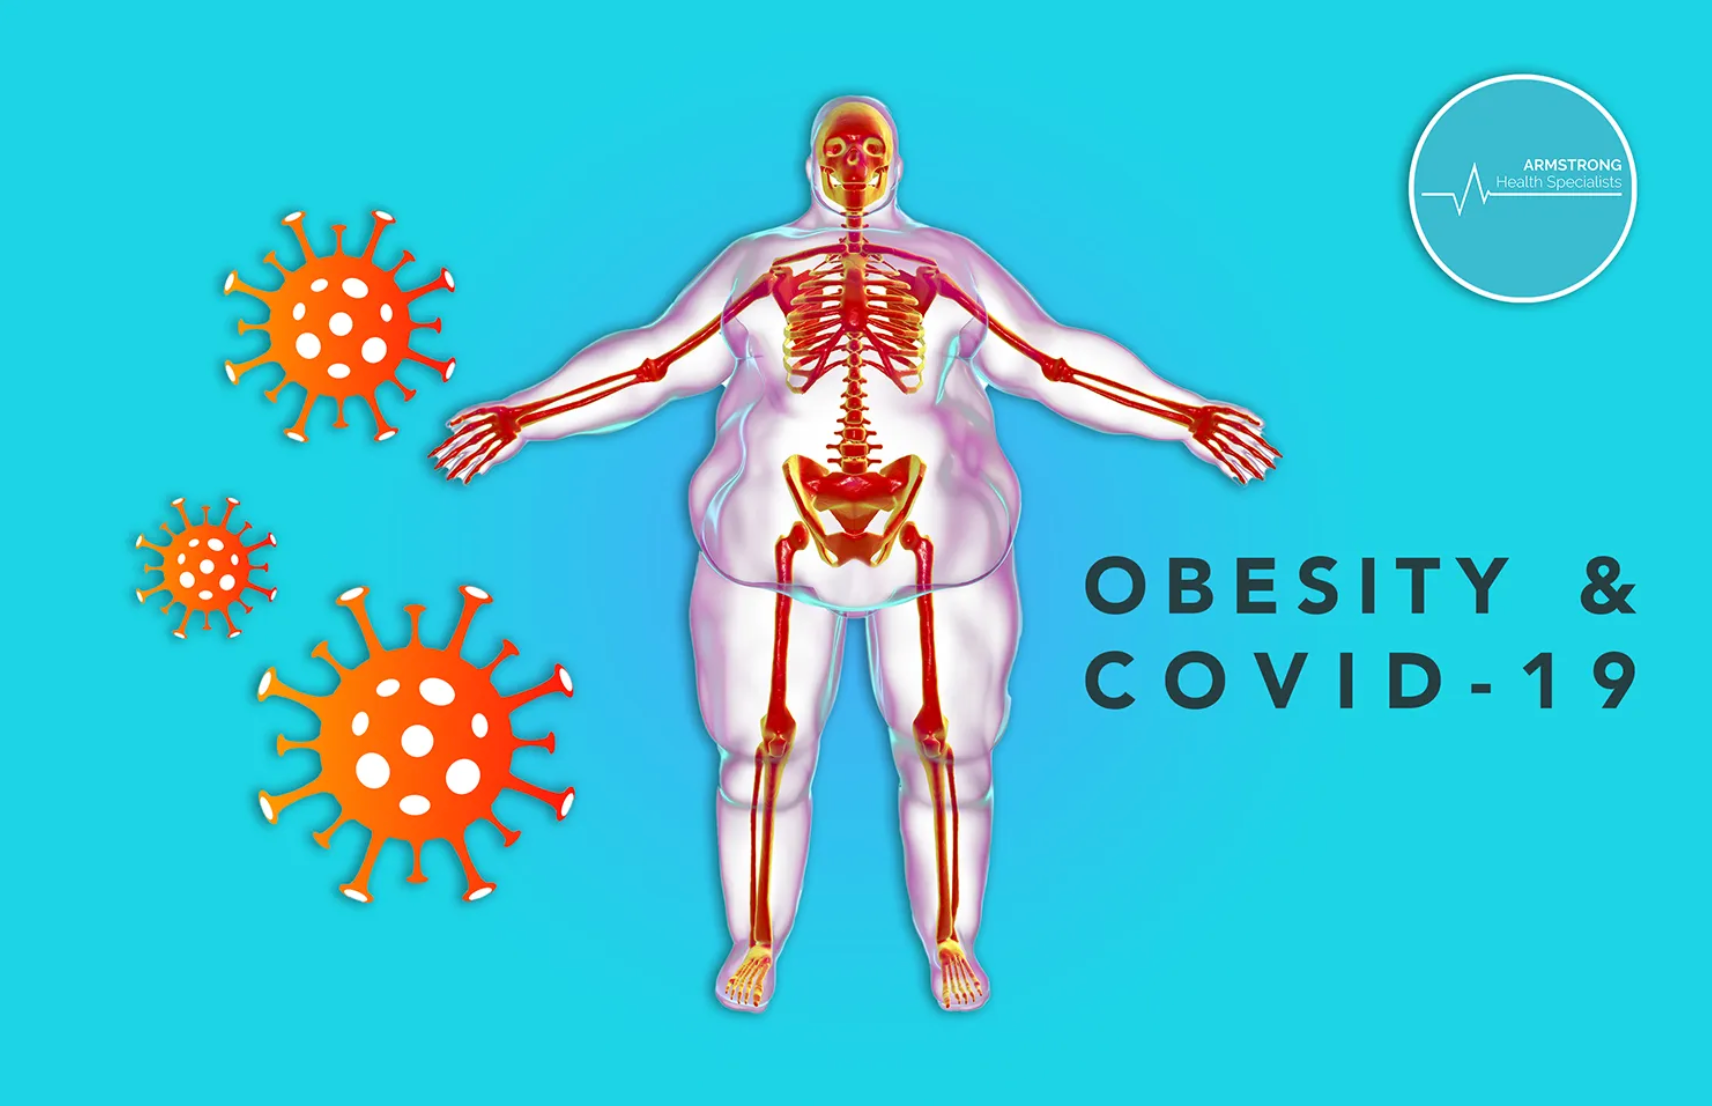 Can having a poor diet or being overweight increase your risk of developing COVID- 19??